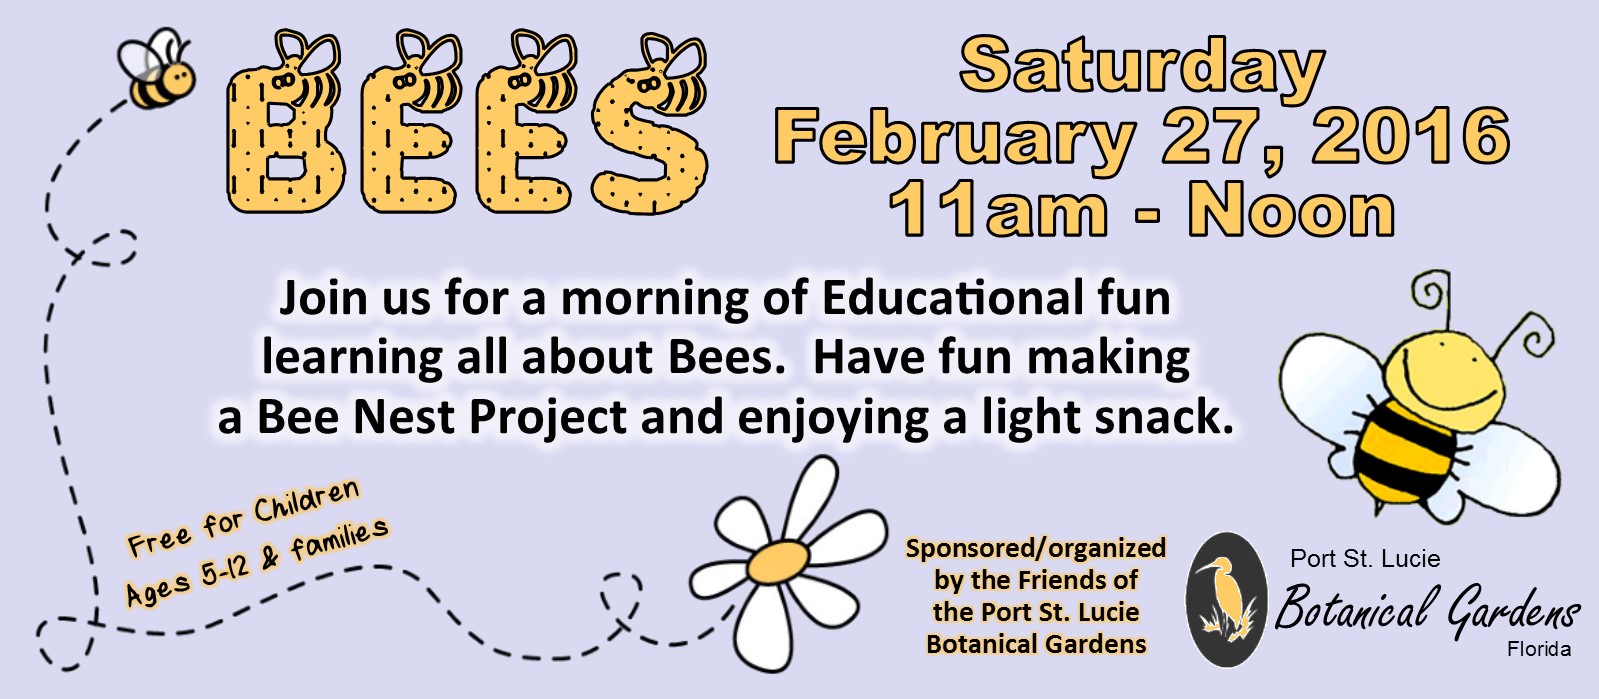 Kids Event at the PSL Botanical Gardens: Bees